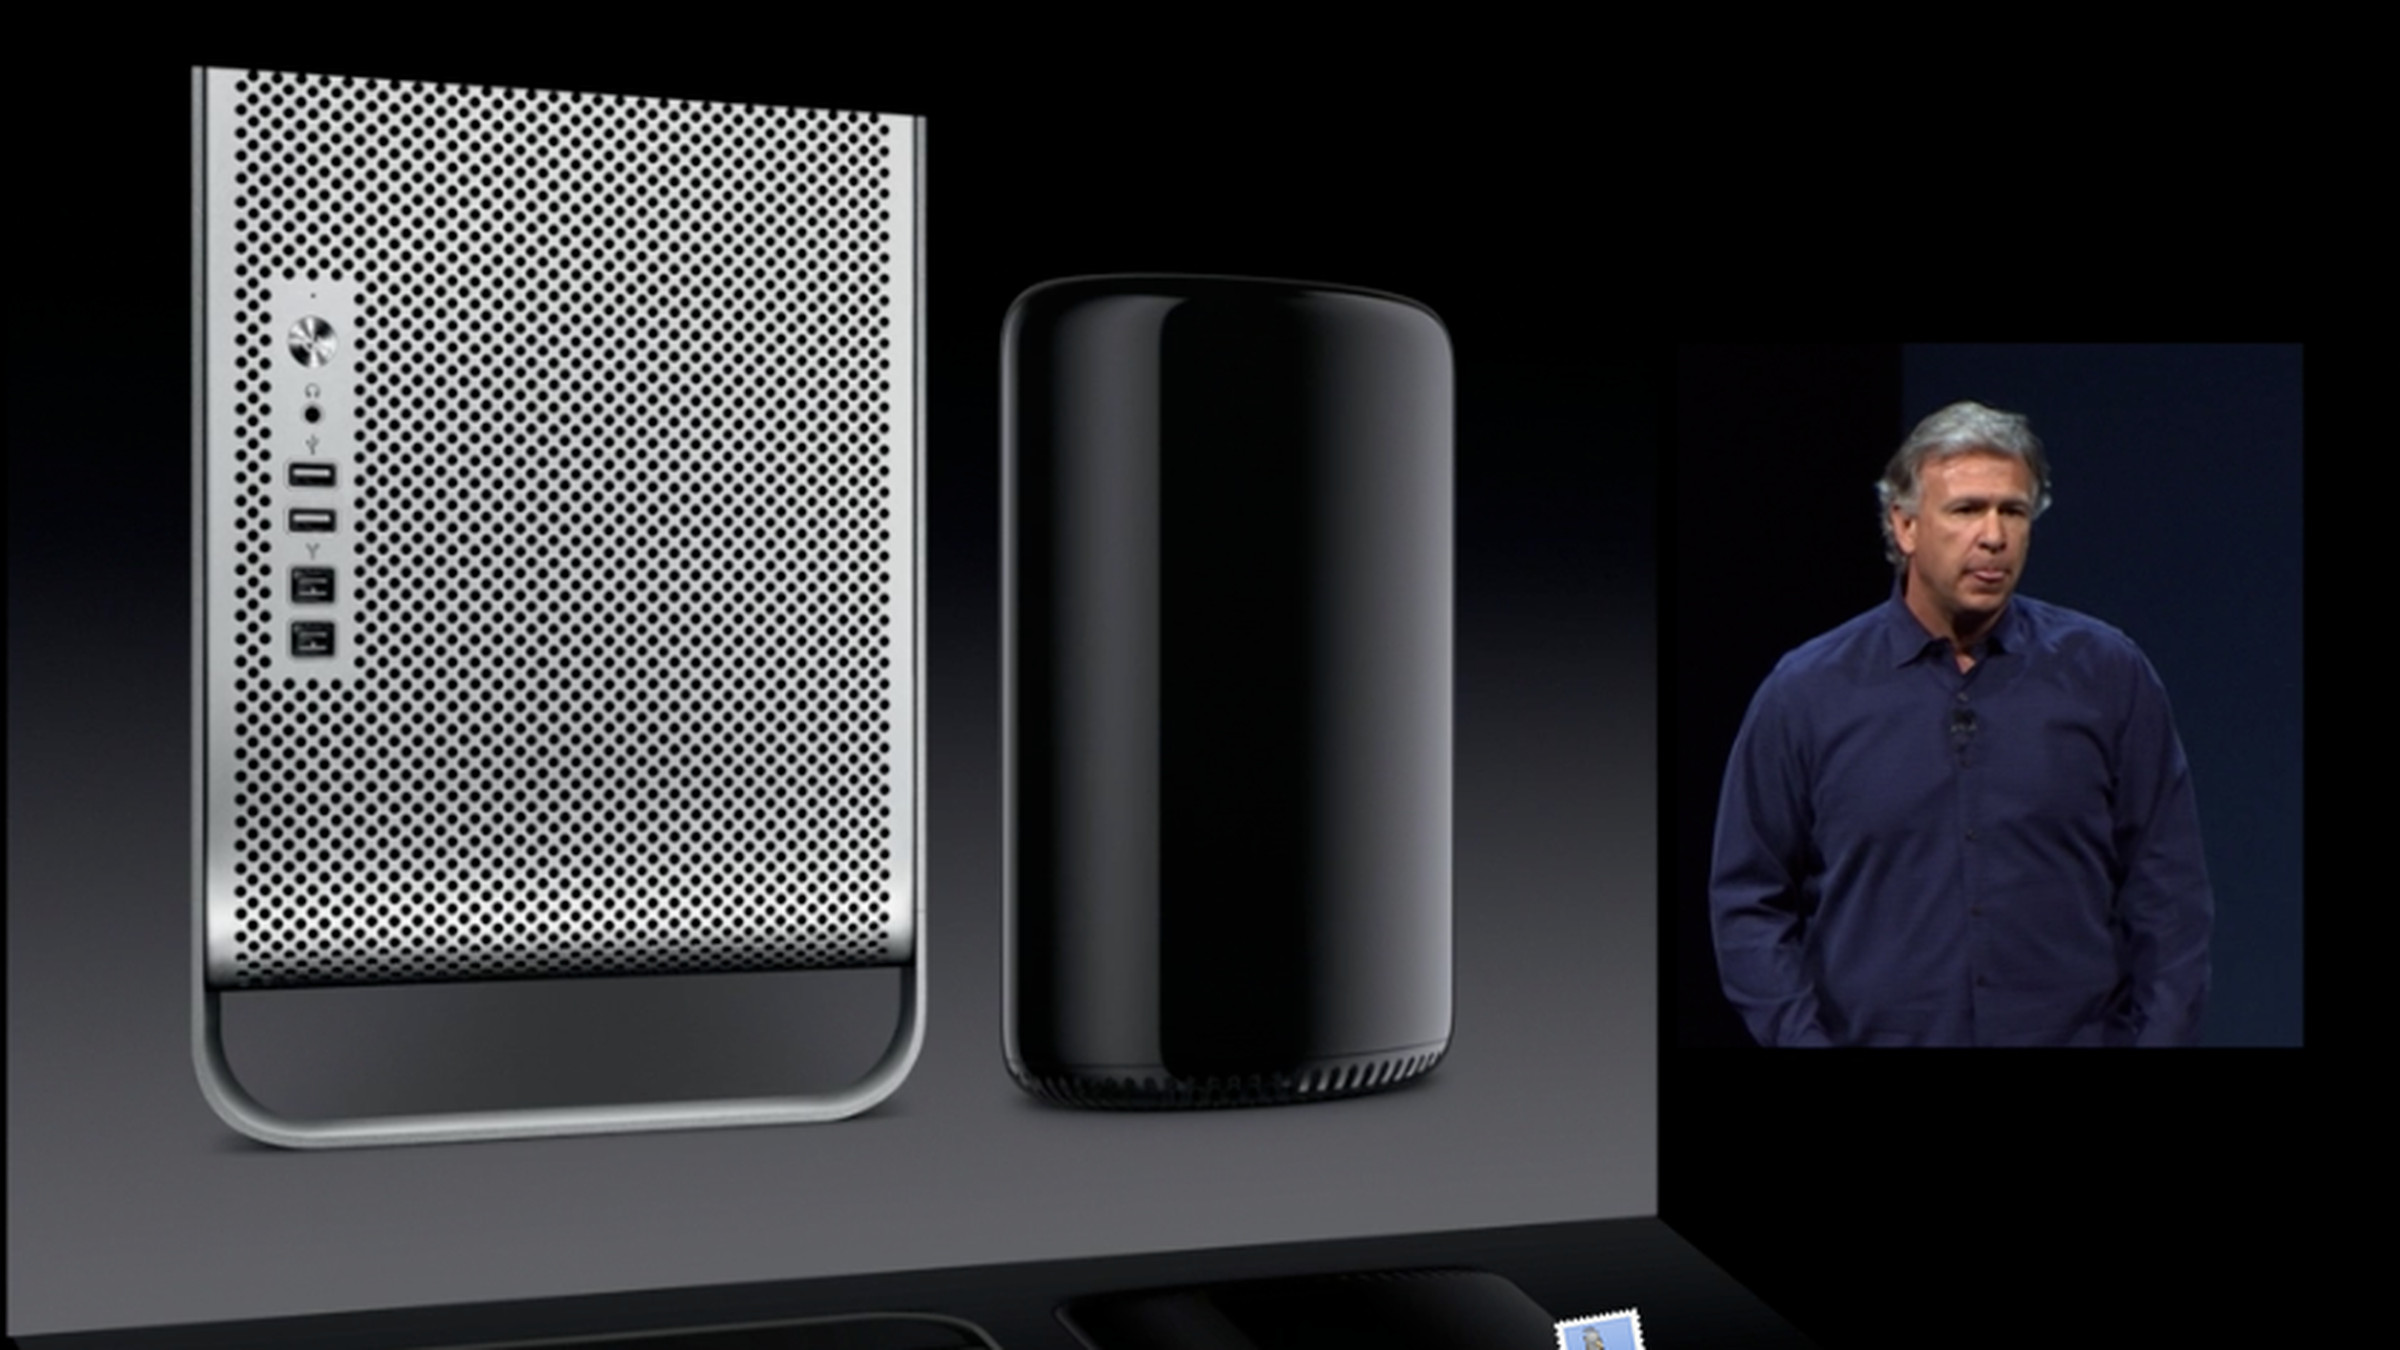 New Mac Pro Teaser Pictures